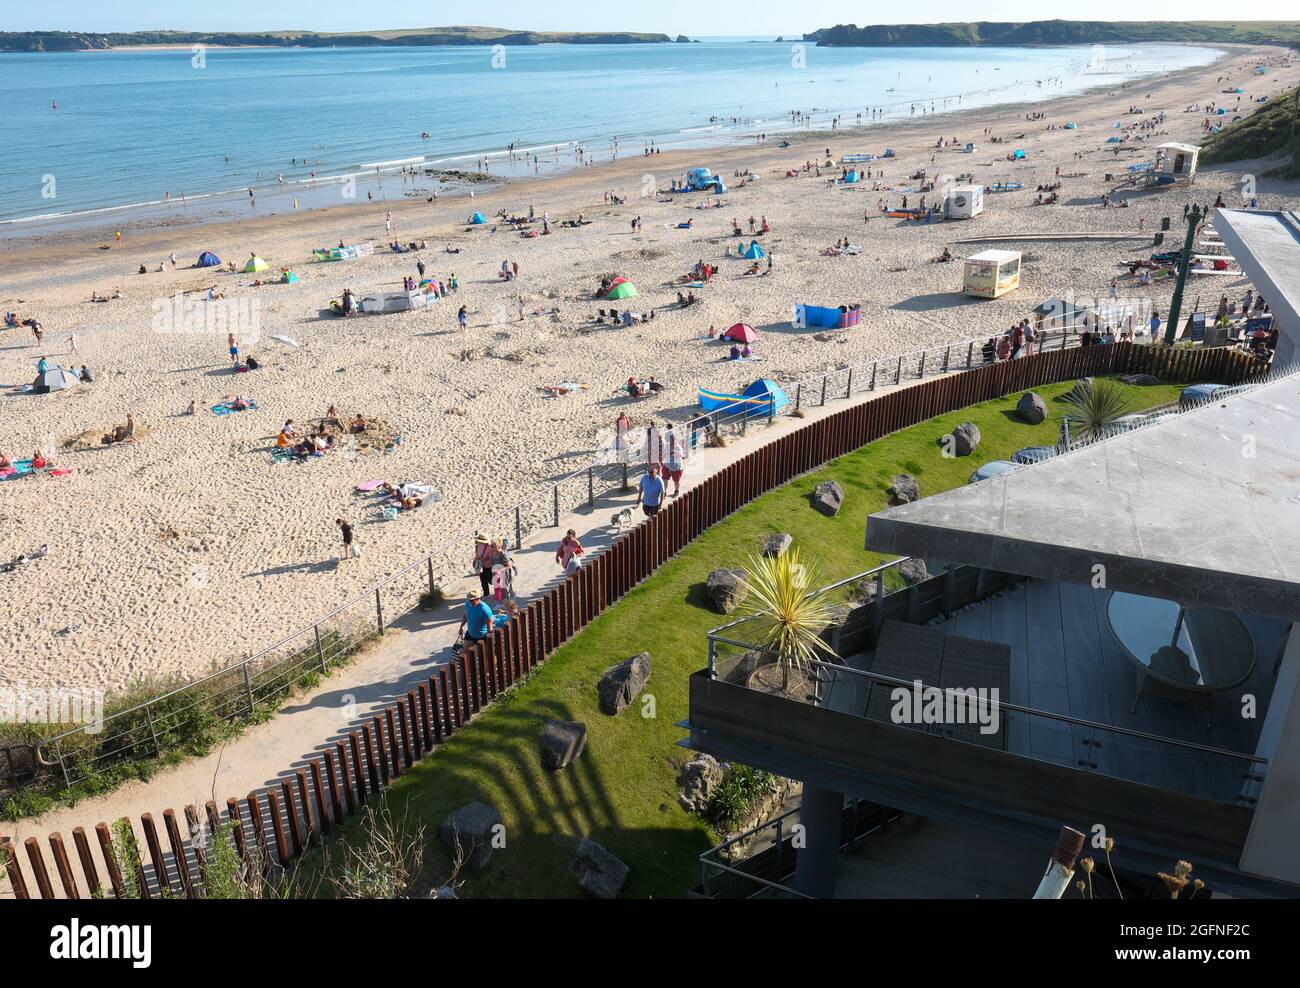 Tenby Wales - The South Beach seen in the evening during August 2021 busy with staycation visitors Stock Photo